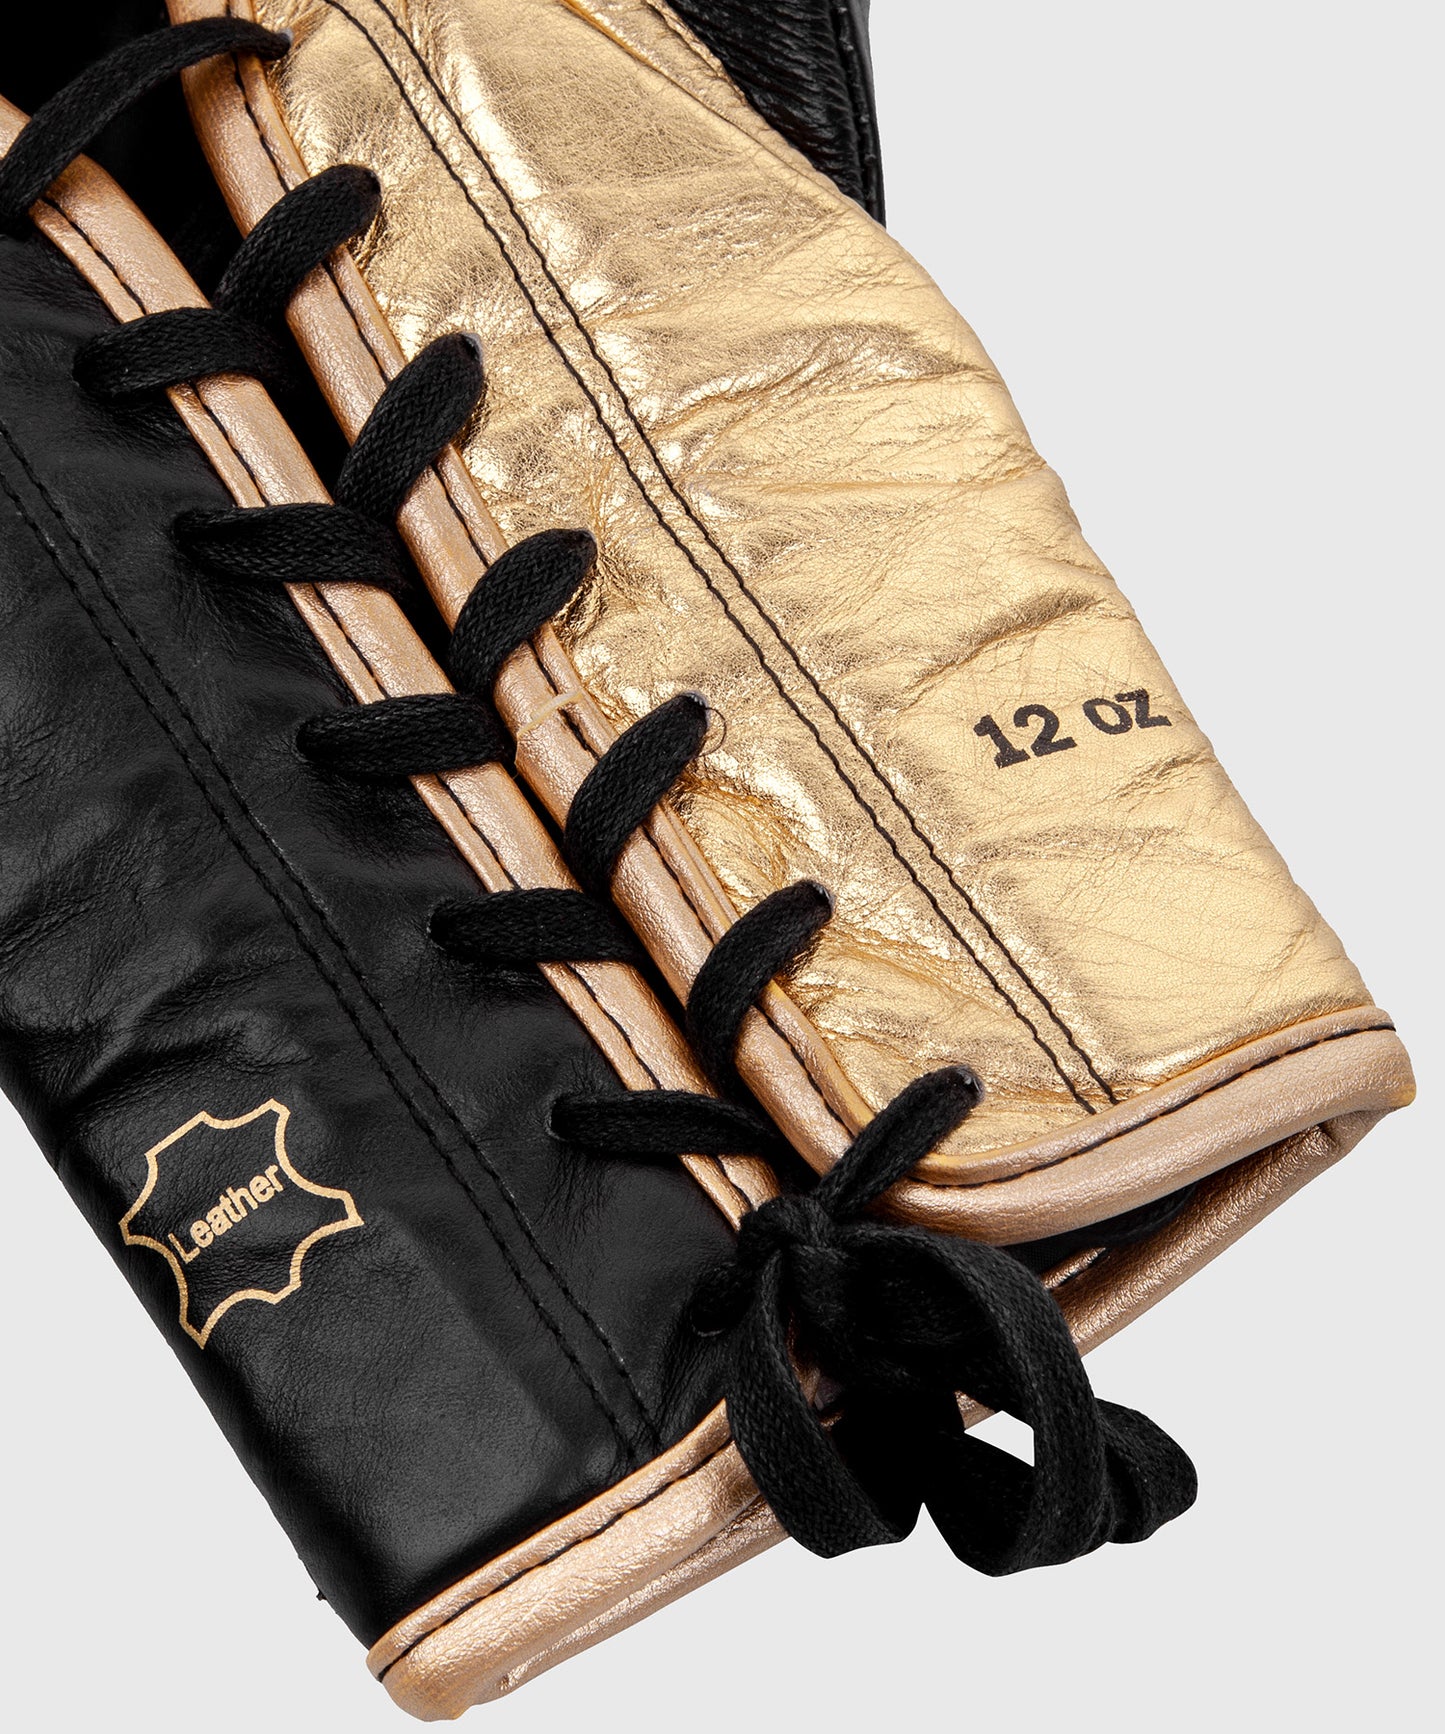 Venum Shield Pro Boxing Gloves - With Laces - Black/Gold